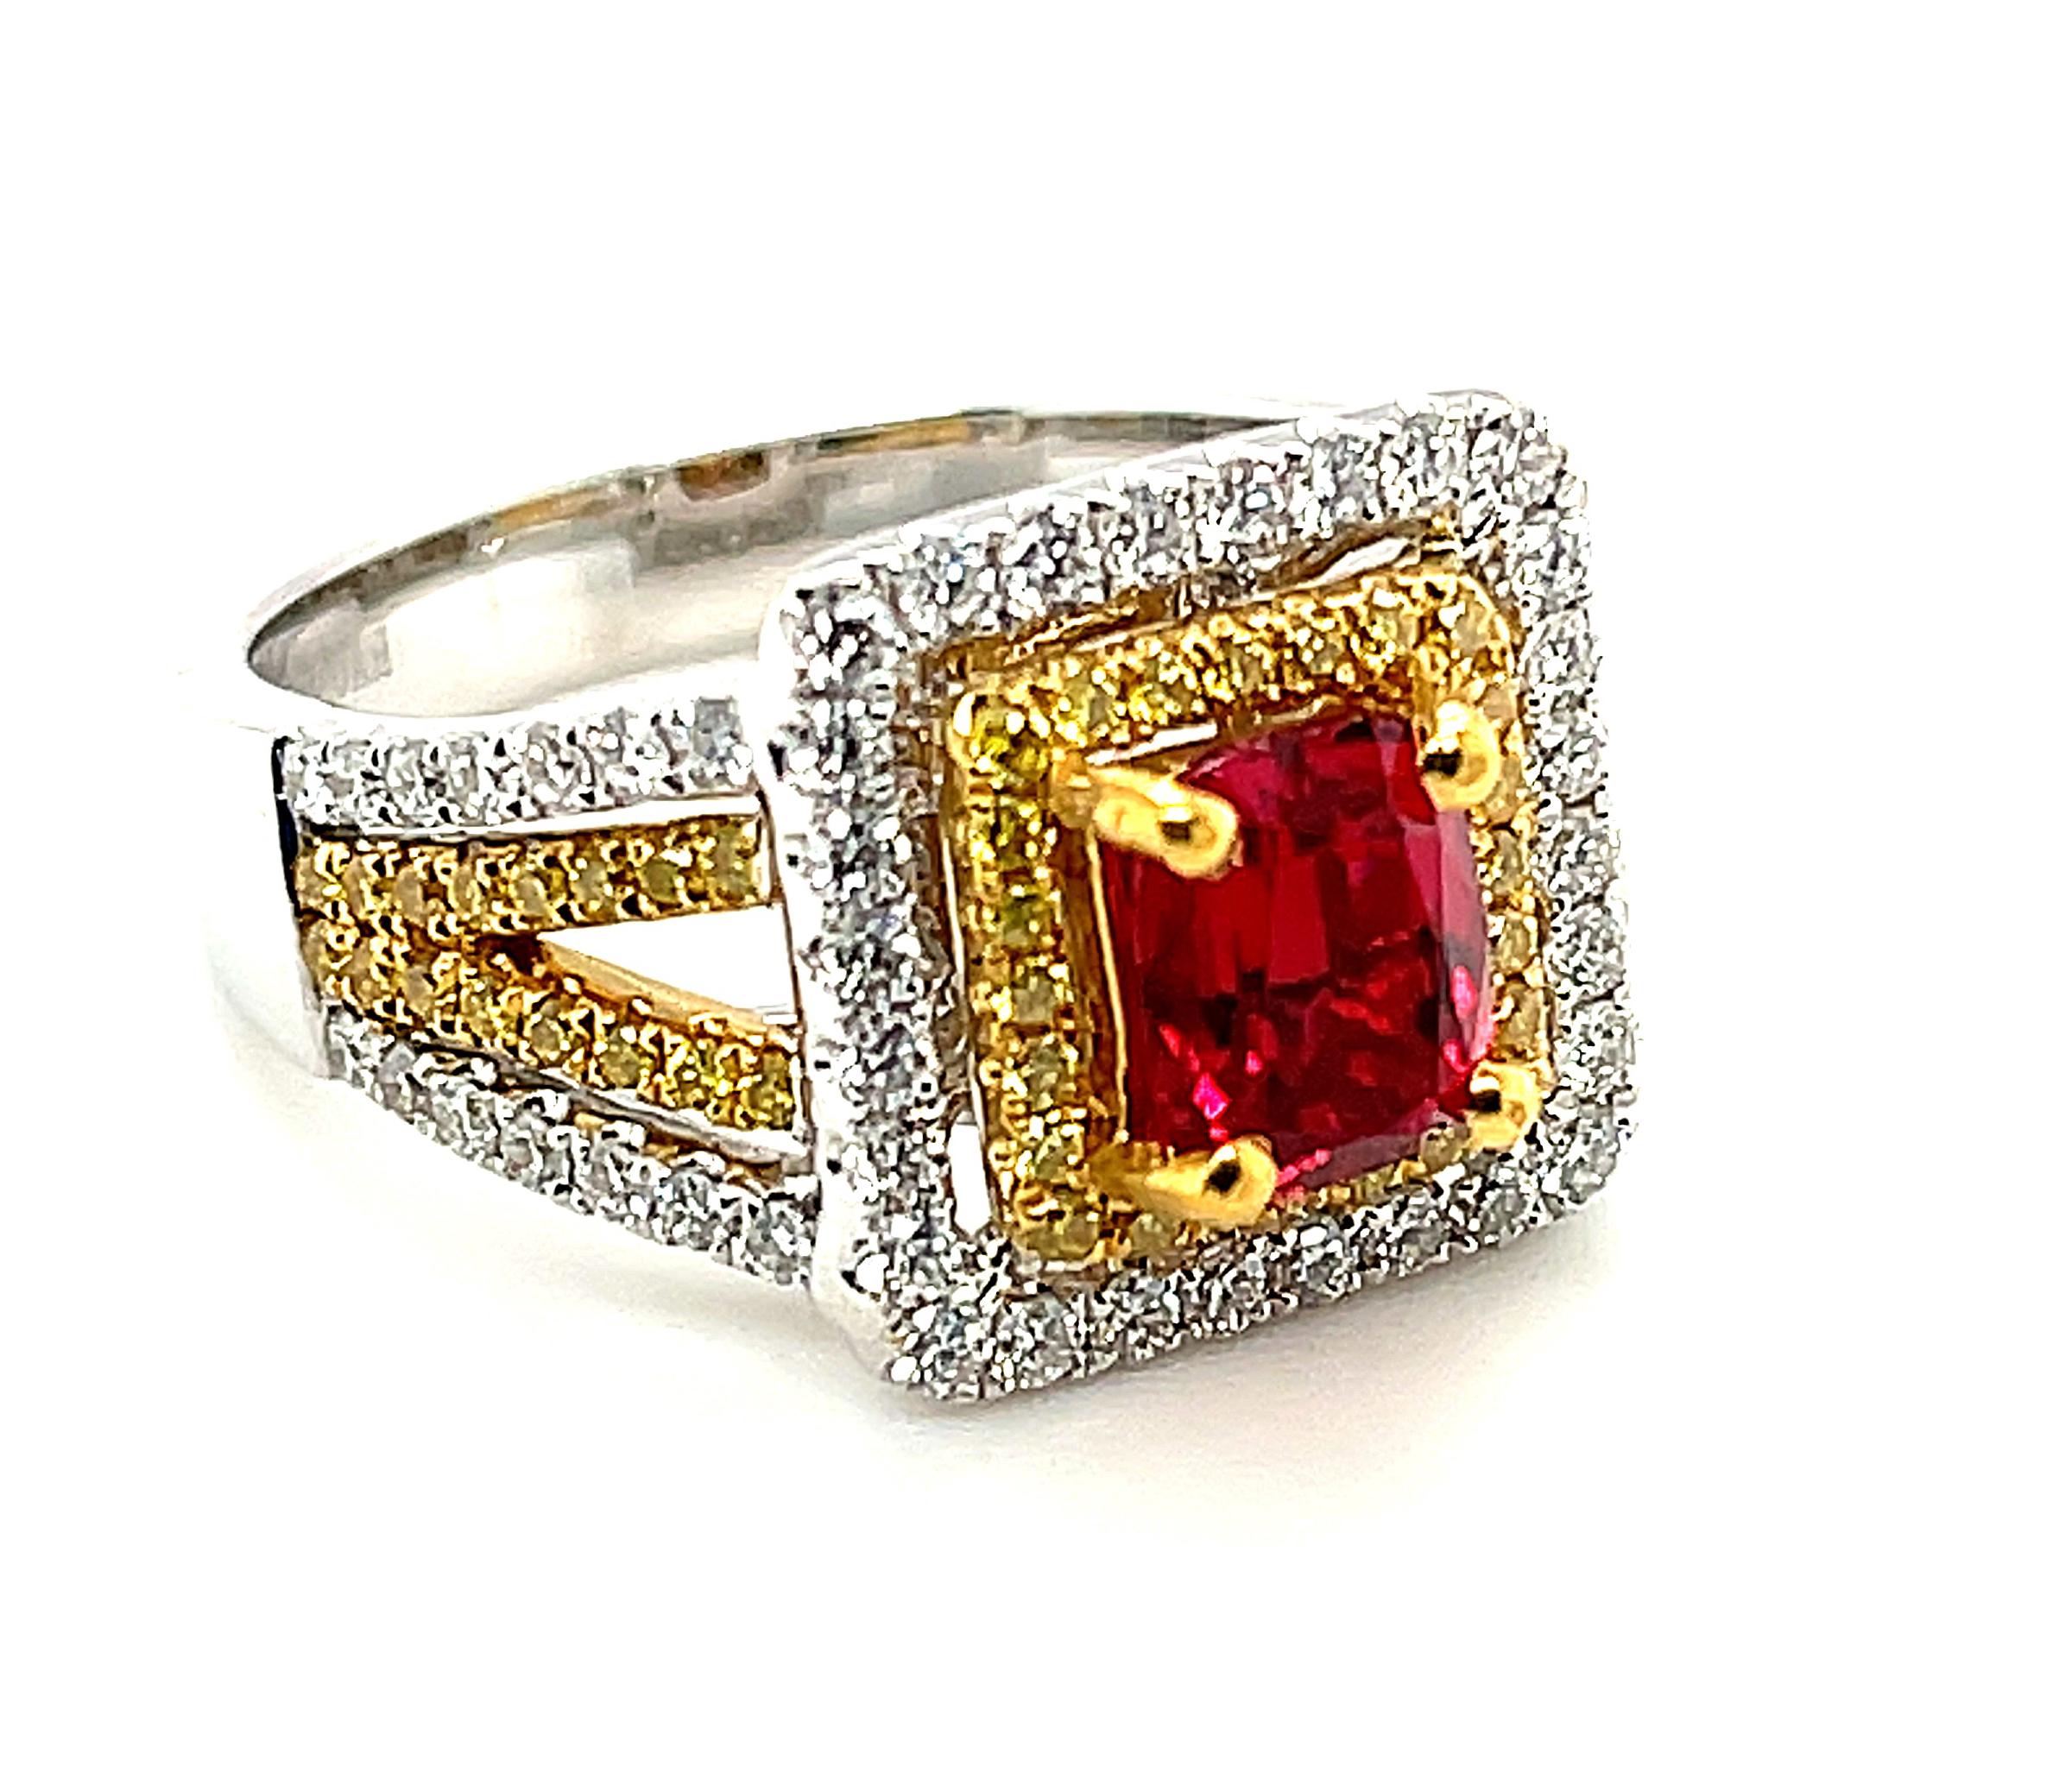 Cushion Cut 1.23 Carat Burmese Red Spinel and Diamond Cocktail Ring in Yellow and White Gold For Sale